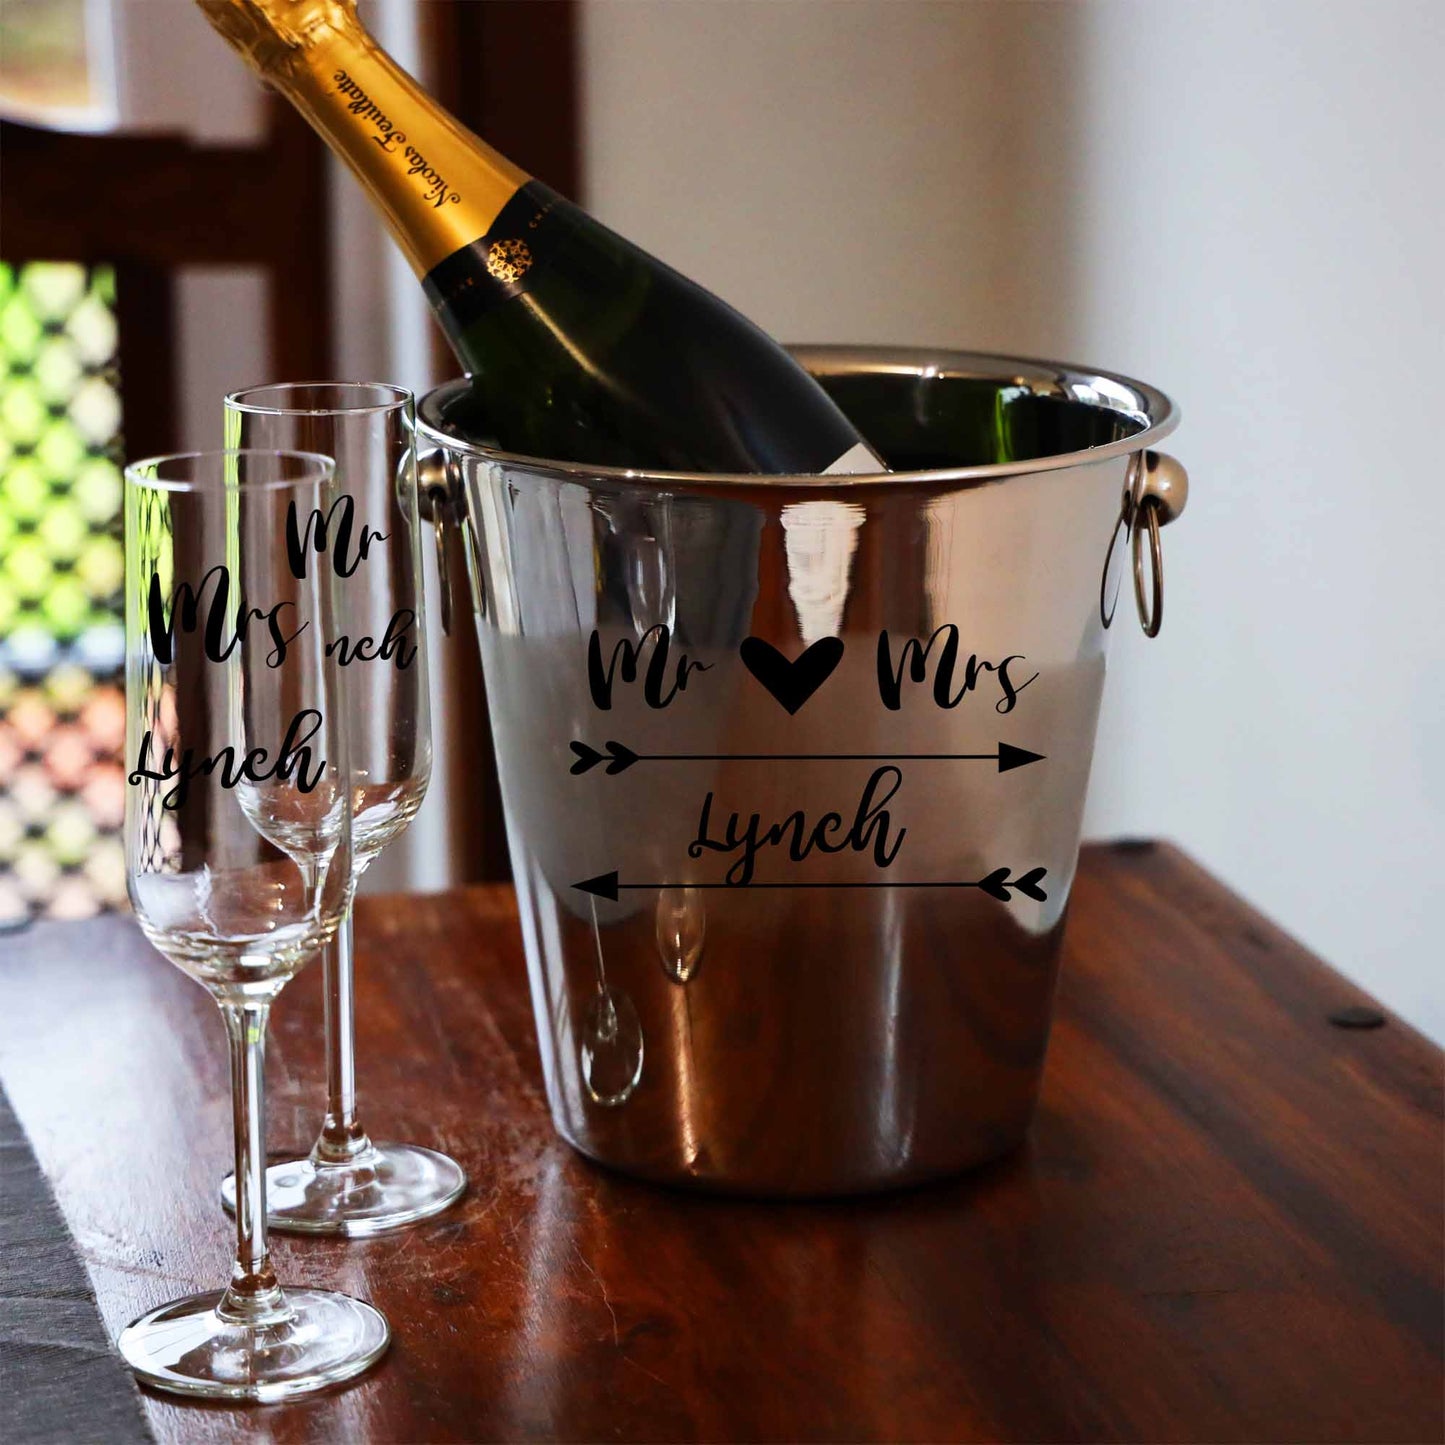 Personalised Mr & Mrs/ Mr & Mr / Mrs & Mrs Ice Bucket With matching Champagne Glasses  - Always Looking Good - Ice Bucket With Matching Glasses  